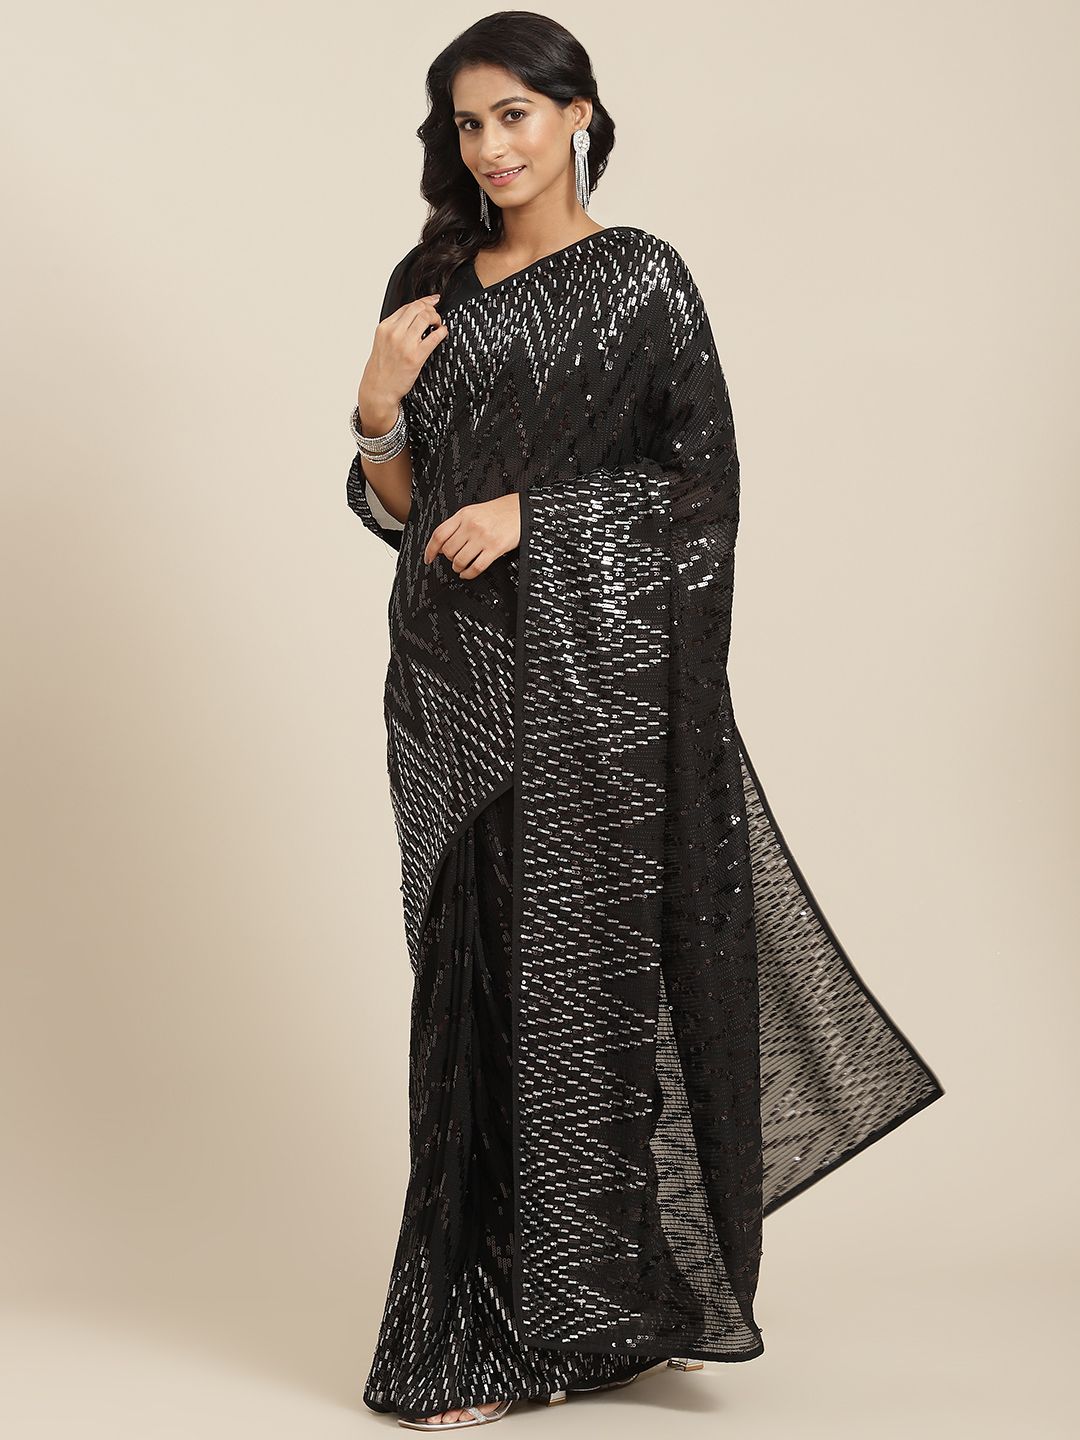 Readiprint Fashions Black Sequinned Pure Georgette Saree Price in India